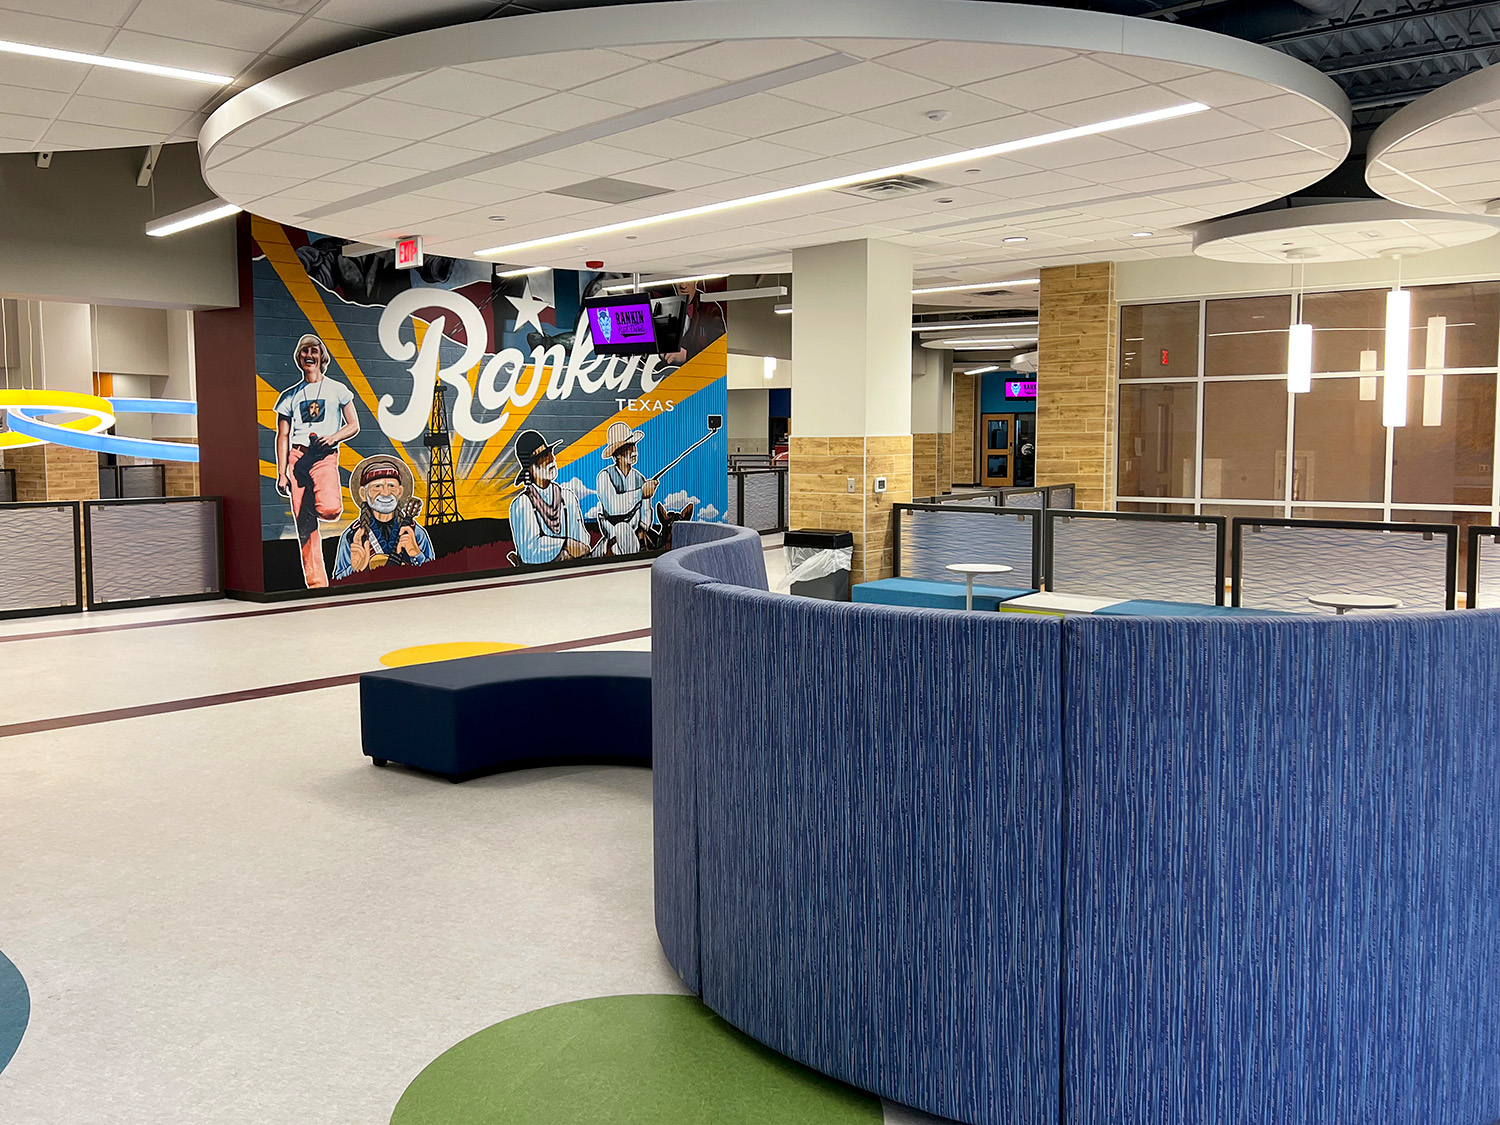 Second level student activity area. Hallway digital signage displays are visible in the foreground and background.<br>All photos courtesy of Rankin Independent School District and Elite Solutions, Inc.